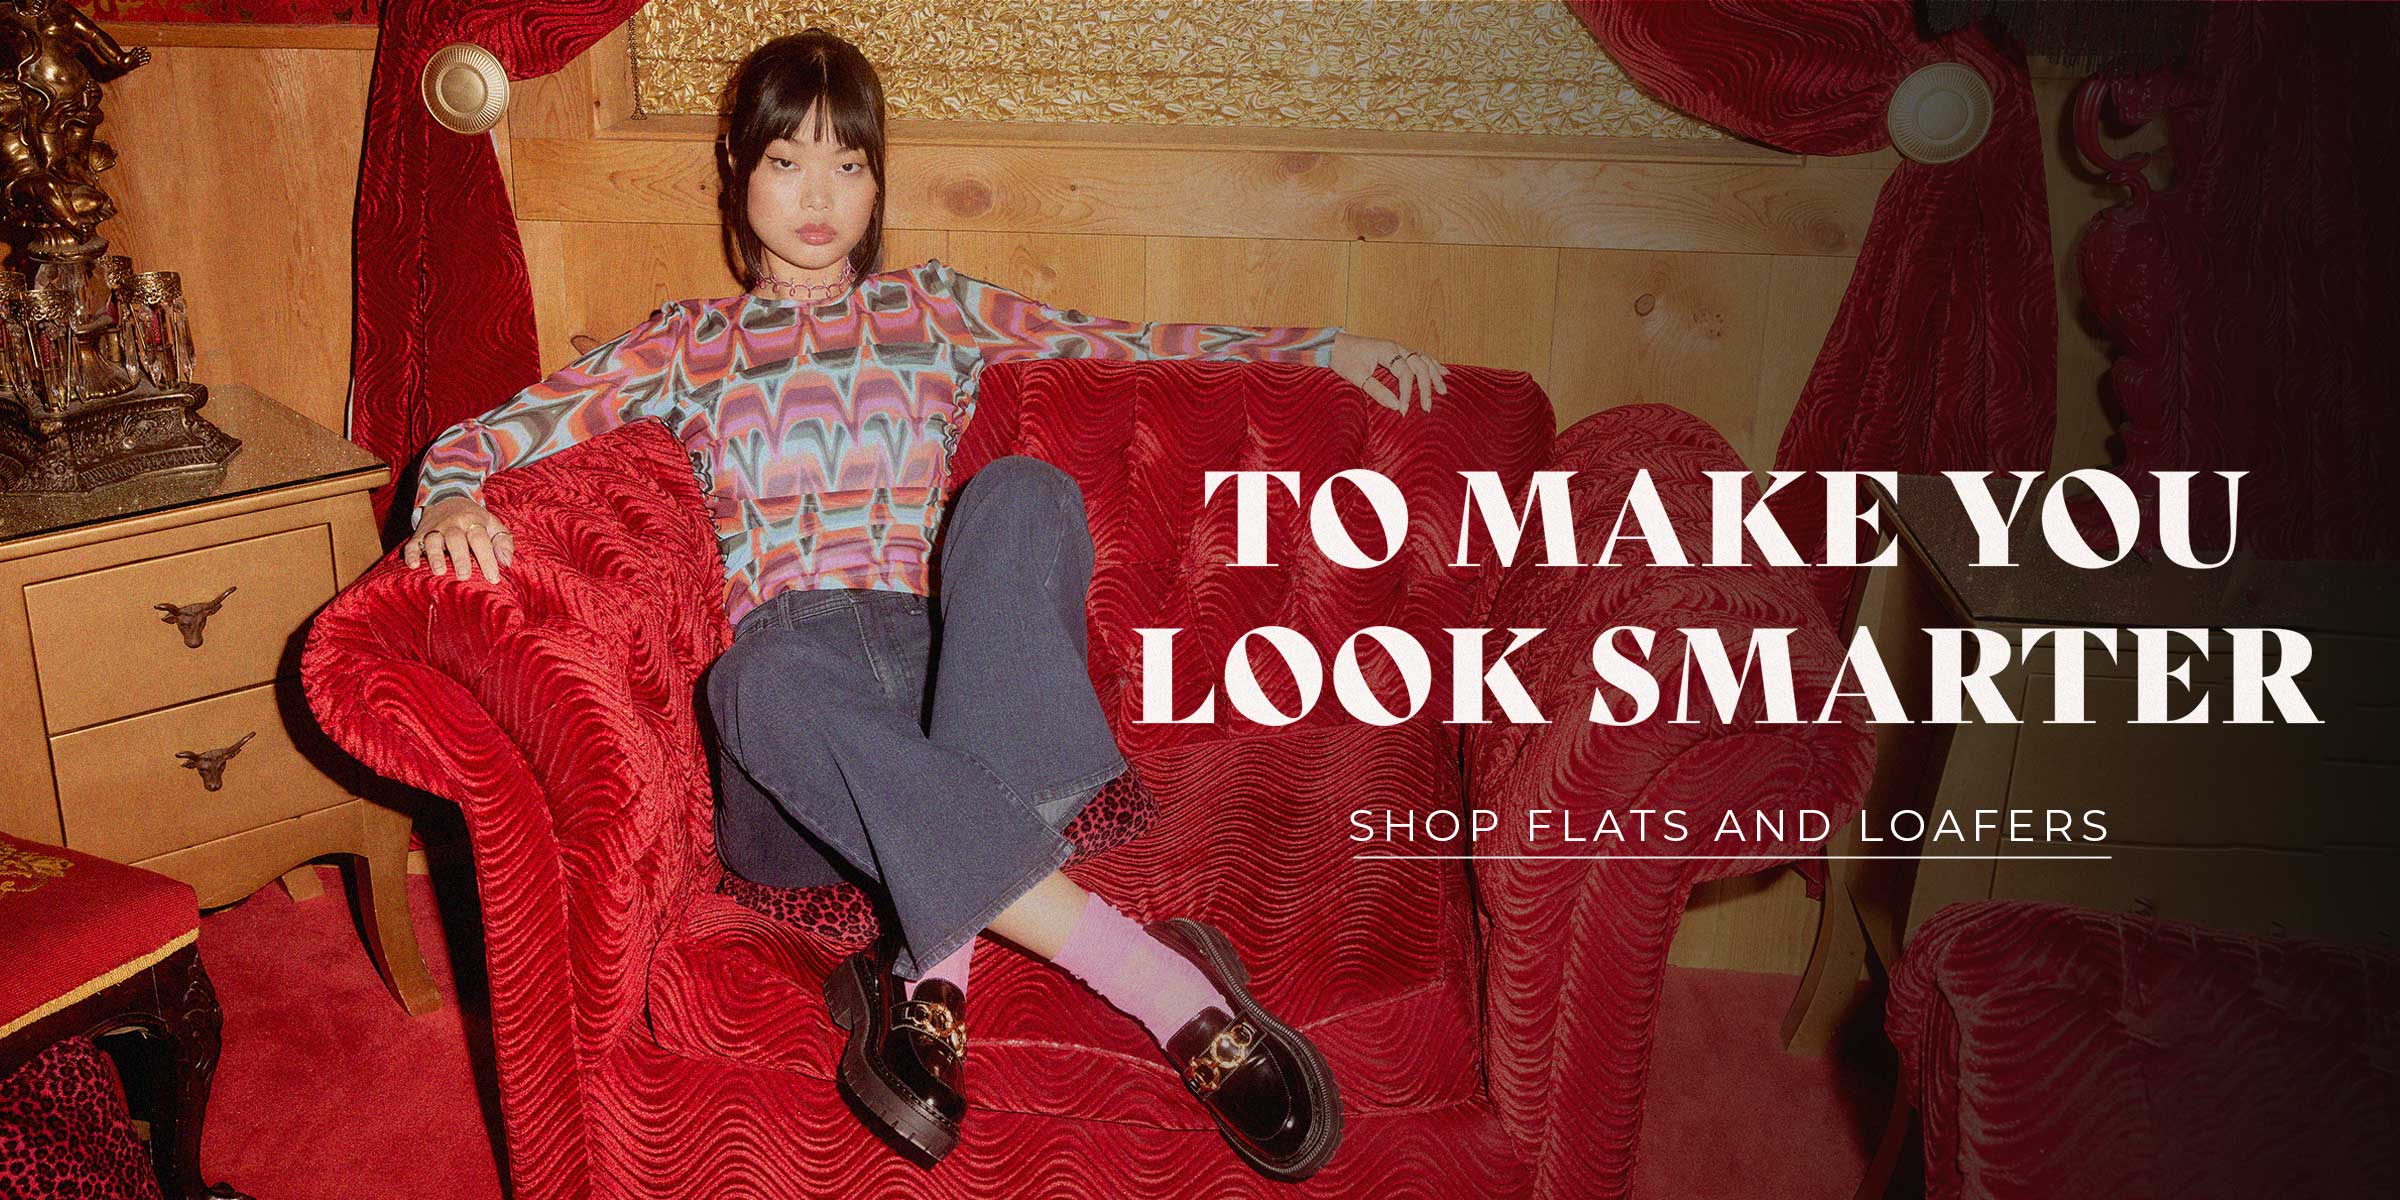 To make you look smarter. Shop flats and loafers from Circus NY by Sam Edelman